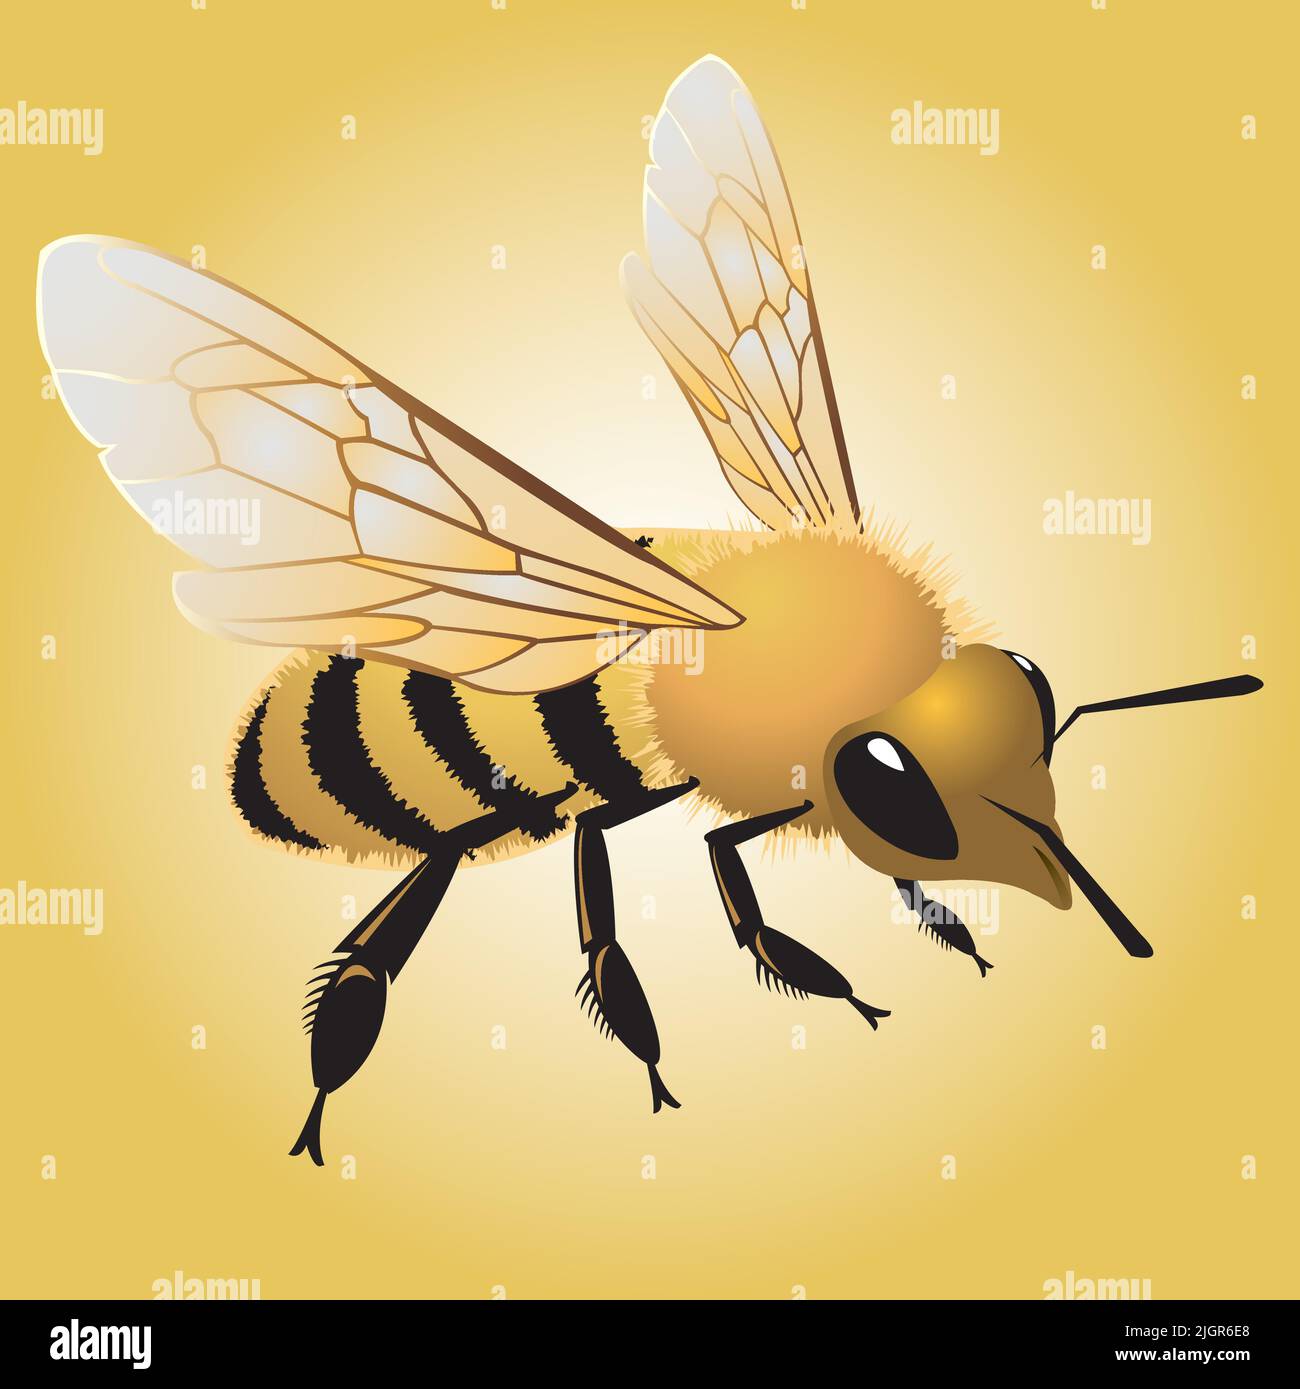 A graphic vector illustration of a yellow and black striped bumblebee. Stock Vector